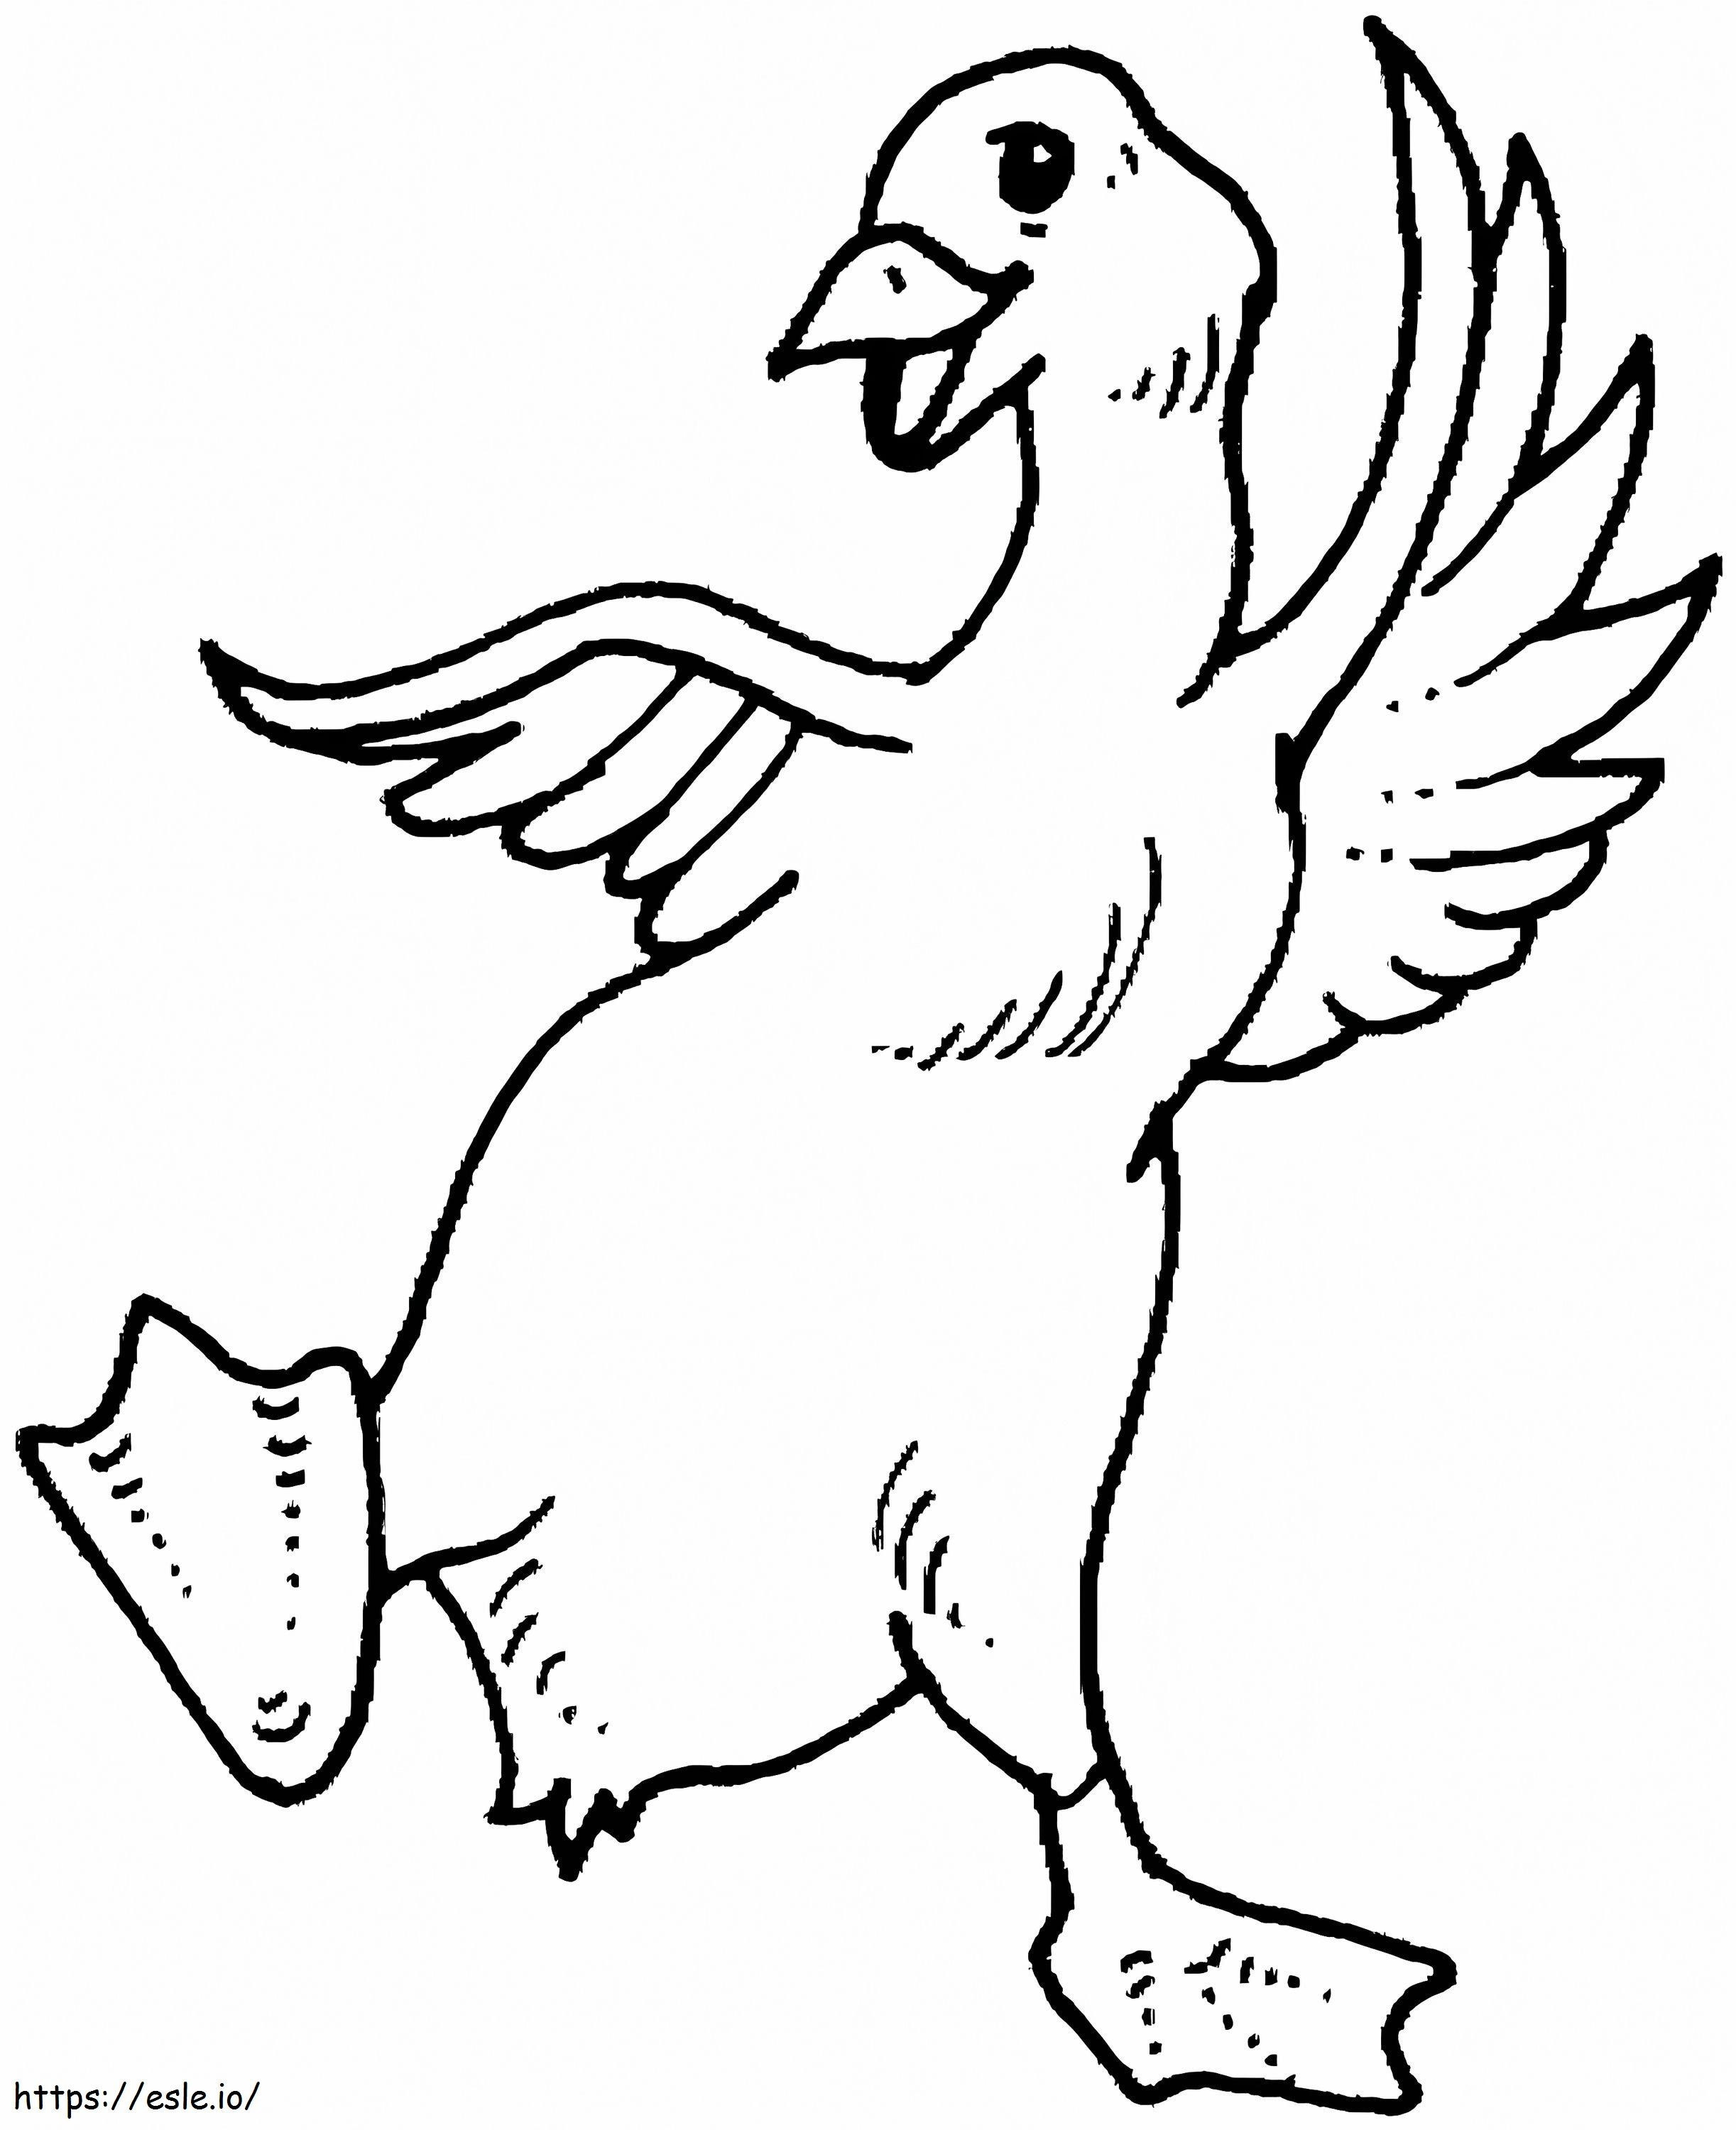 Goose Dancing coloring page